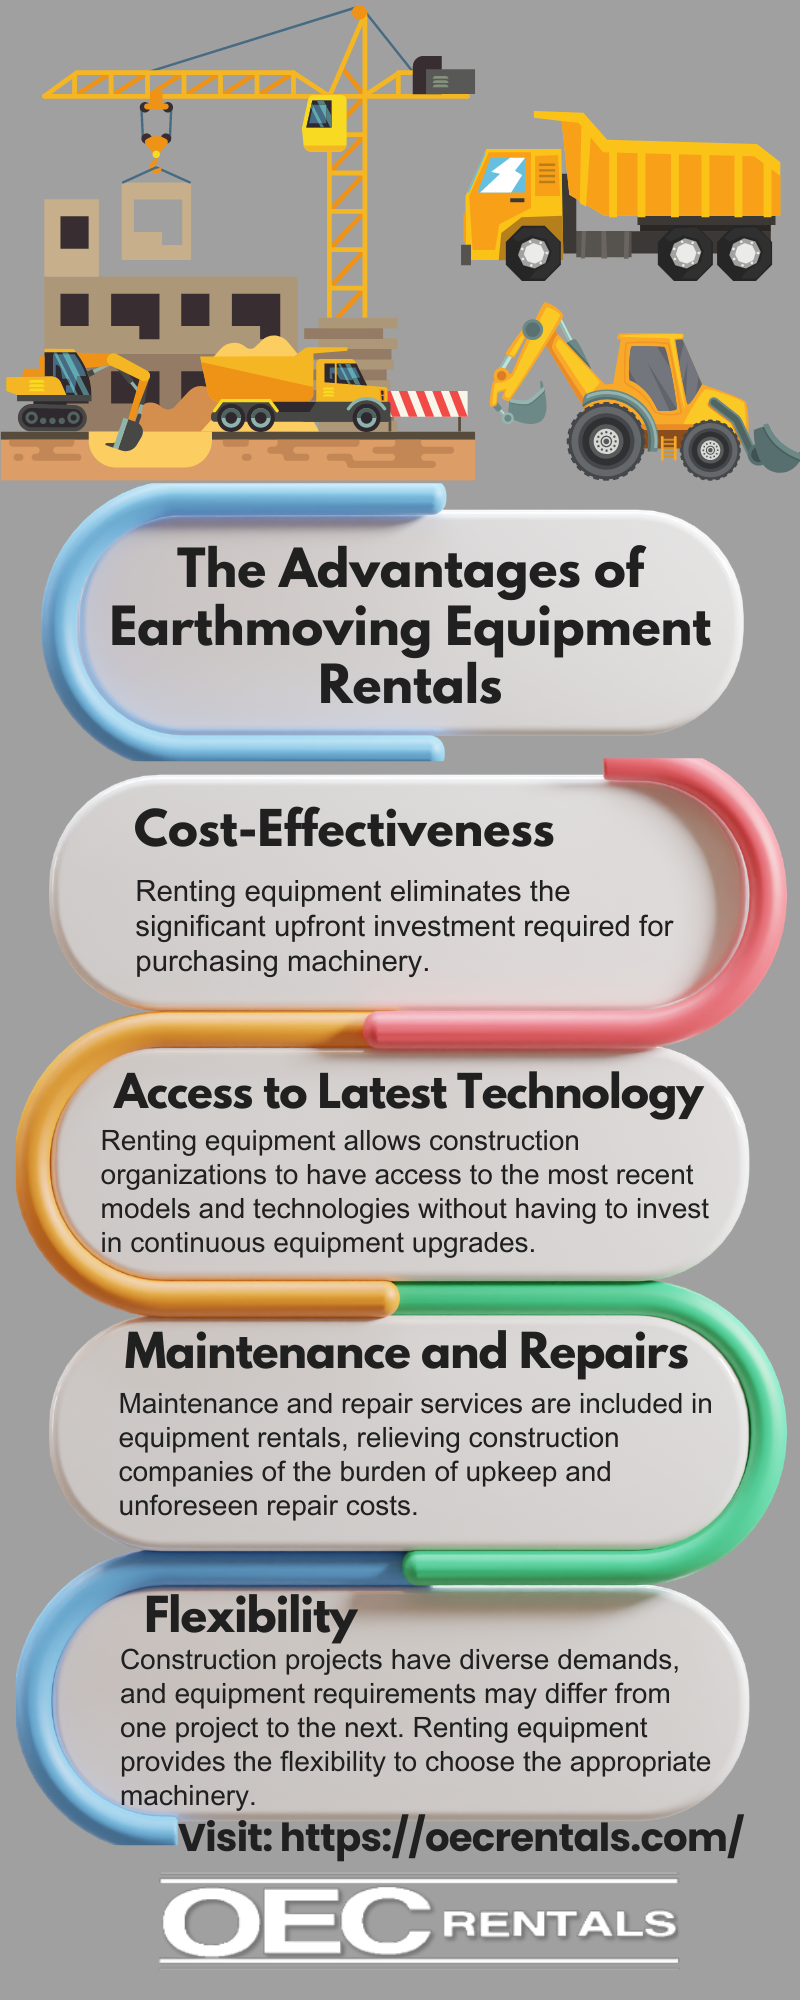 The Advantages of Earthmoving Equipment Rentals